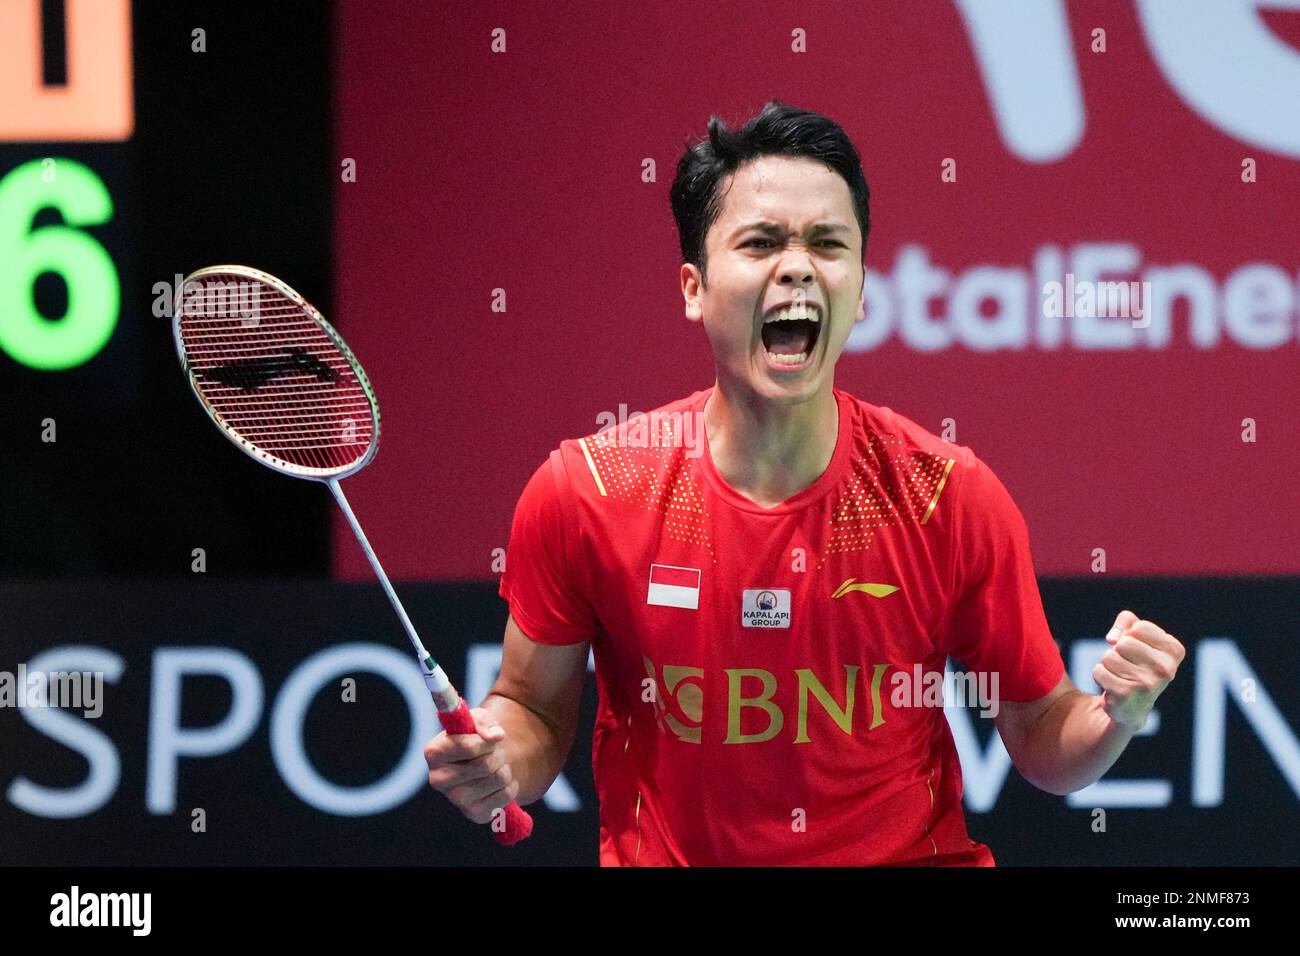 Indonesias Anthony Sinisuka Ginting celebrates winning a mens single match in the Thomas Cup mens team final match between China and Indonesia, in Aarhus, Denmark, Sunday Oct